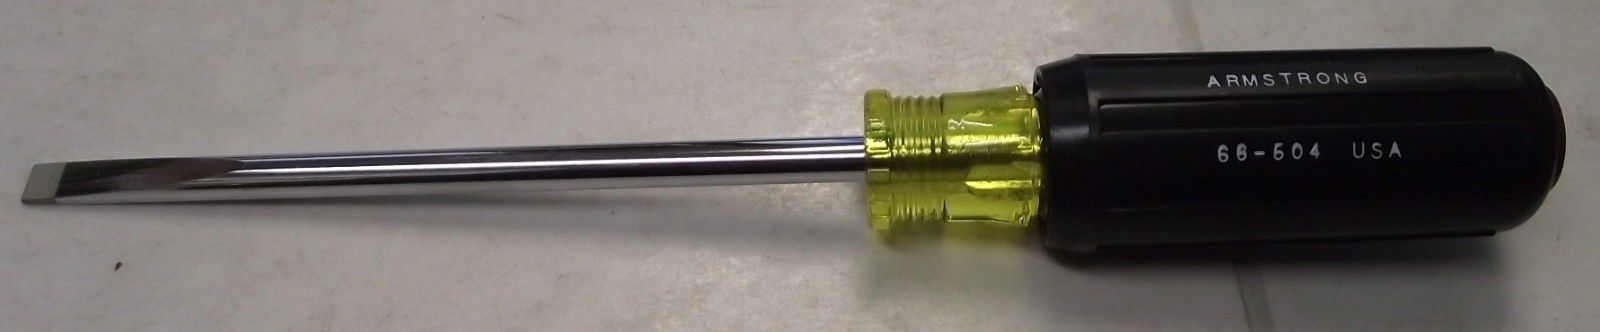 Armstrong 66-504 5/16 x 6" Round Shank Slotted Screwdriver with Cushion Grip USA